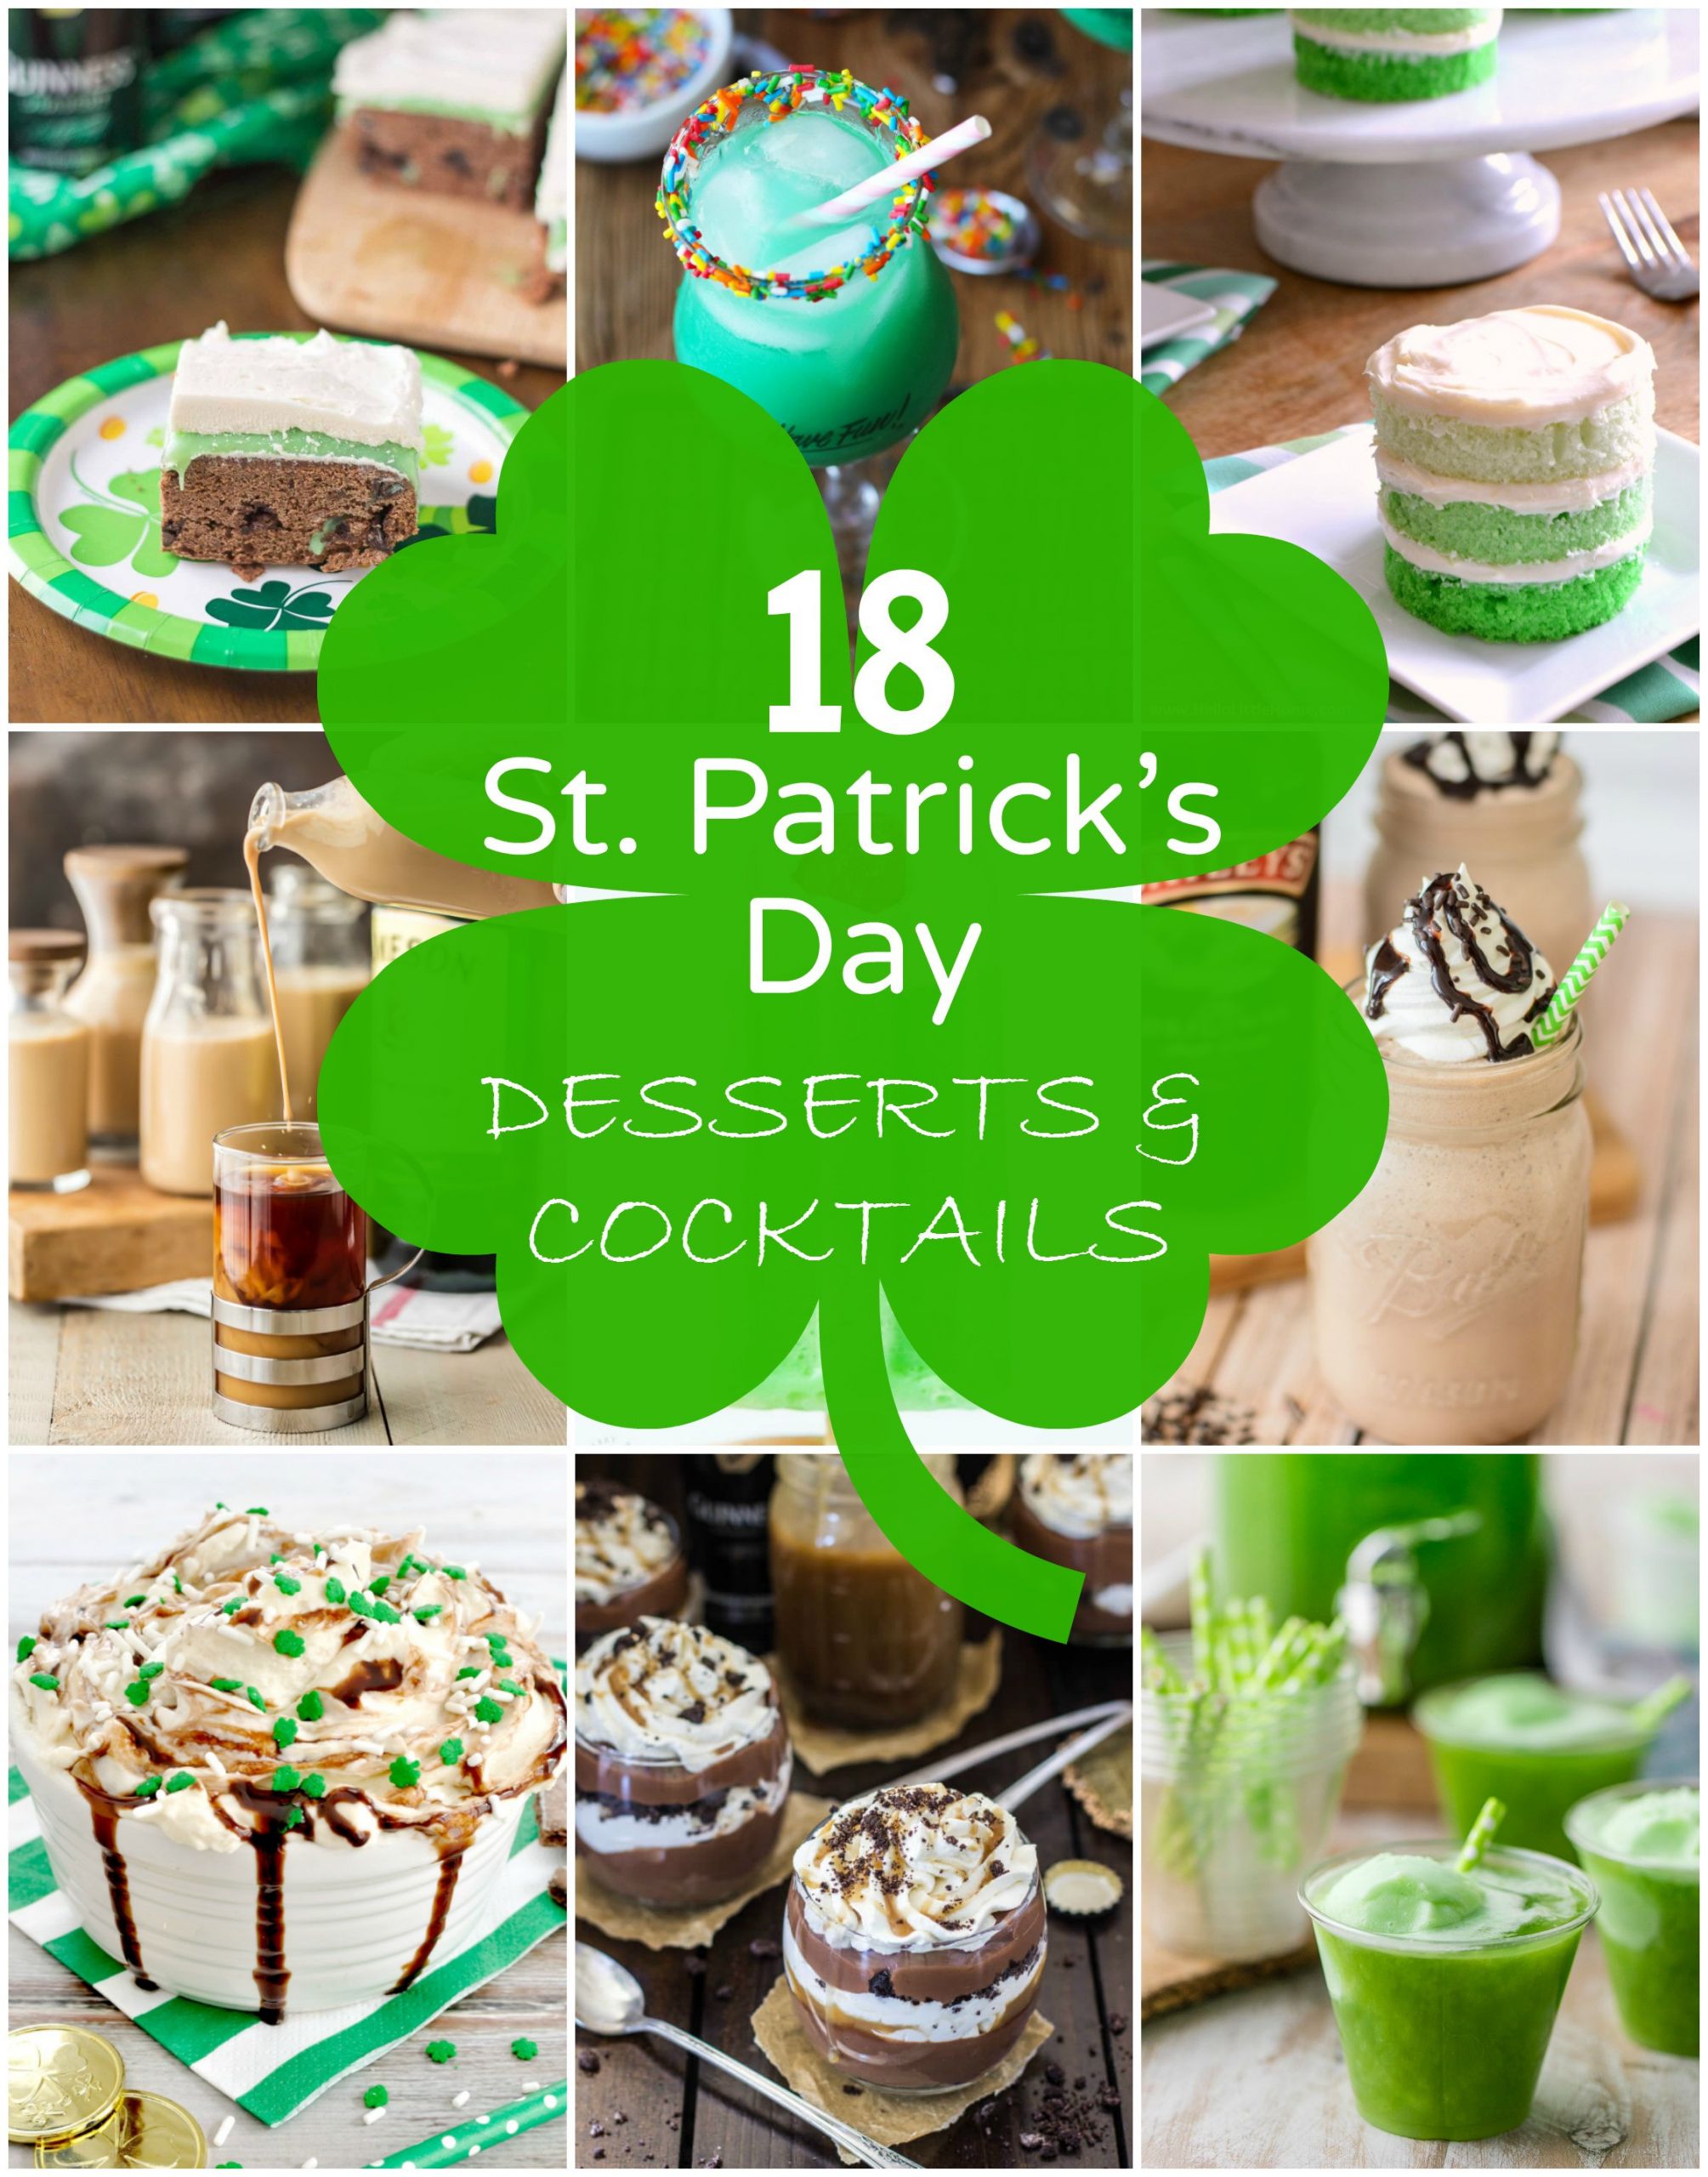 Food For St Patrick's Day Party
 18 St Patrick s Day Desserts And Cocktails